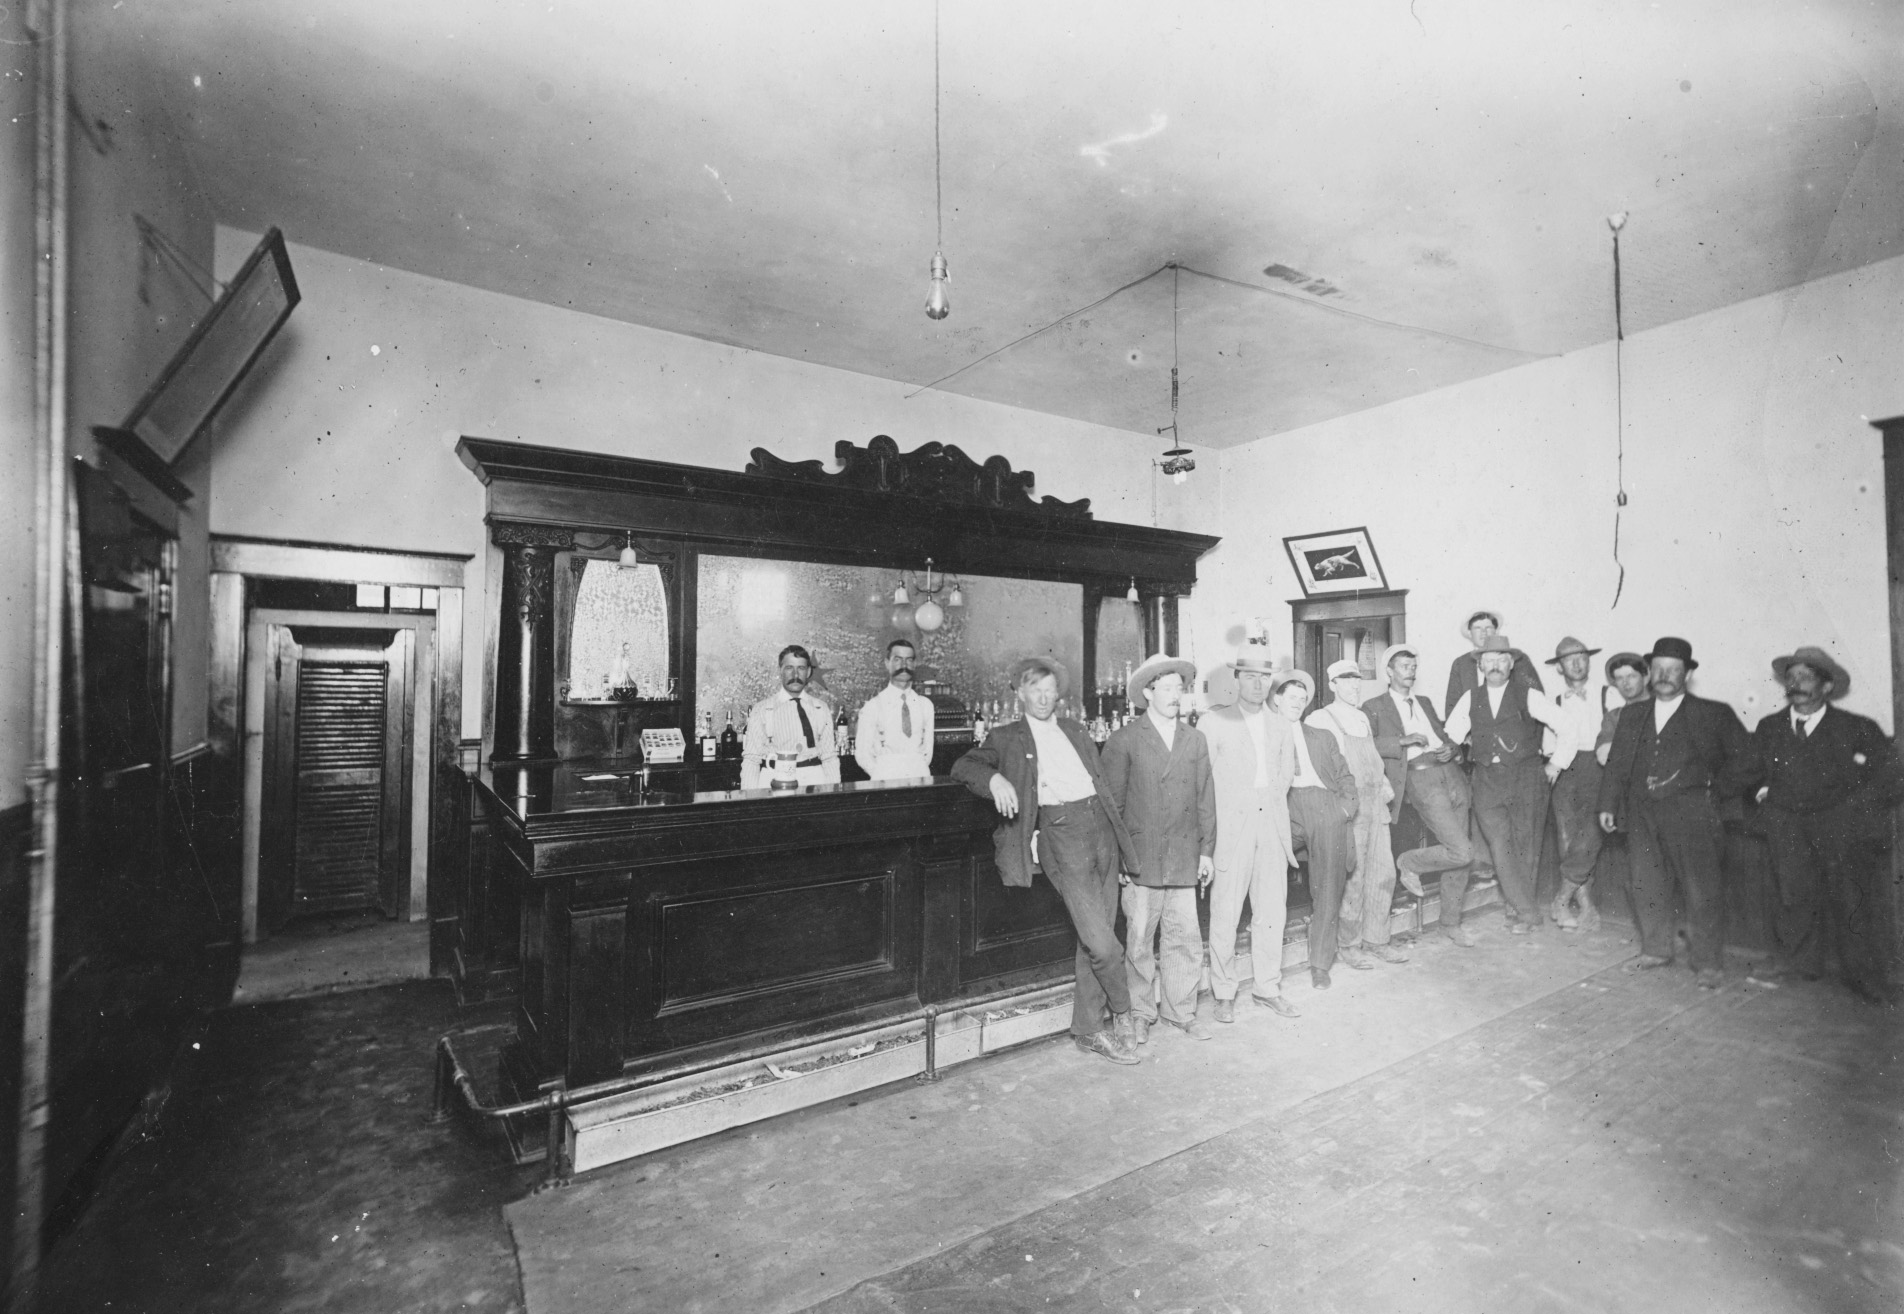 A black and white image of a large bar room. A dark bar is set against the far wall, and three men in white uniforms are standing behind it. A number of men are standing in front of the bar.